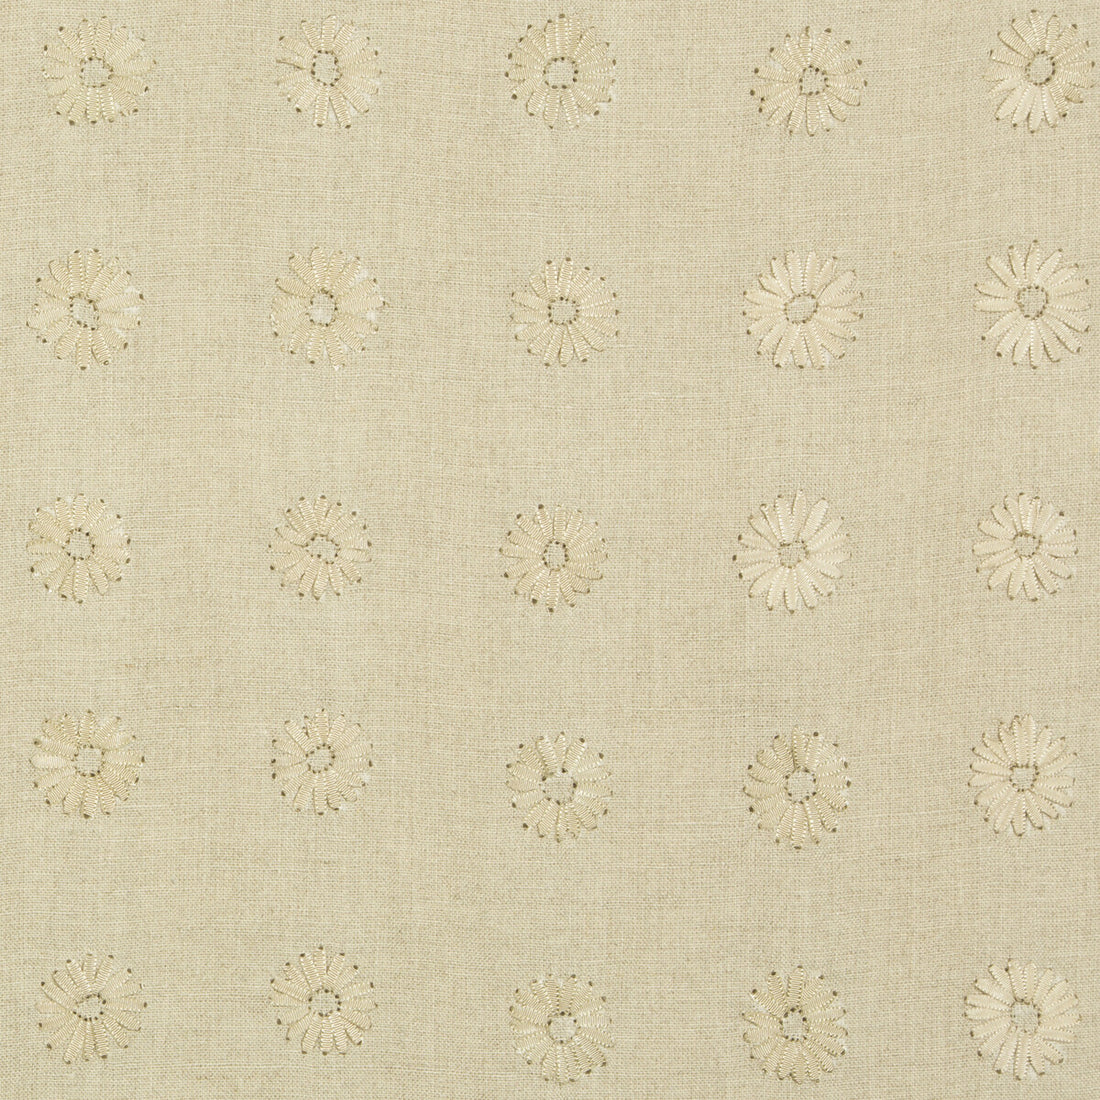 Daisy fabric in linen color - pattern 4077.16.0 - by Kravet Couture in the Calvin Klein Home collection